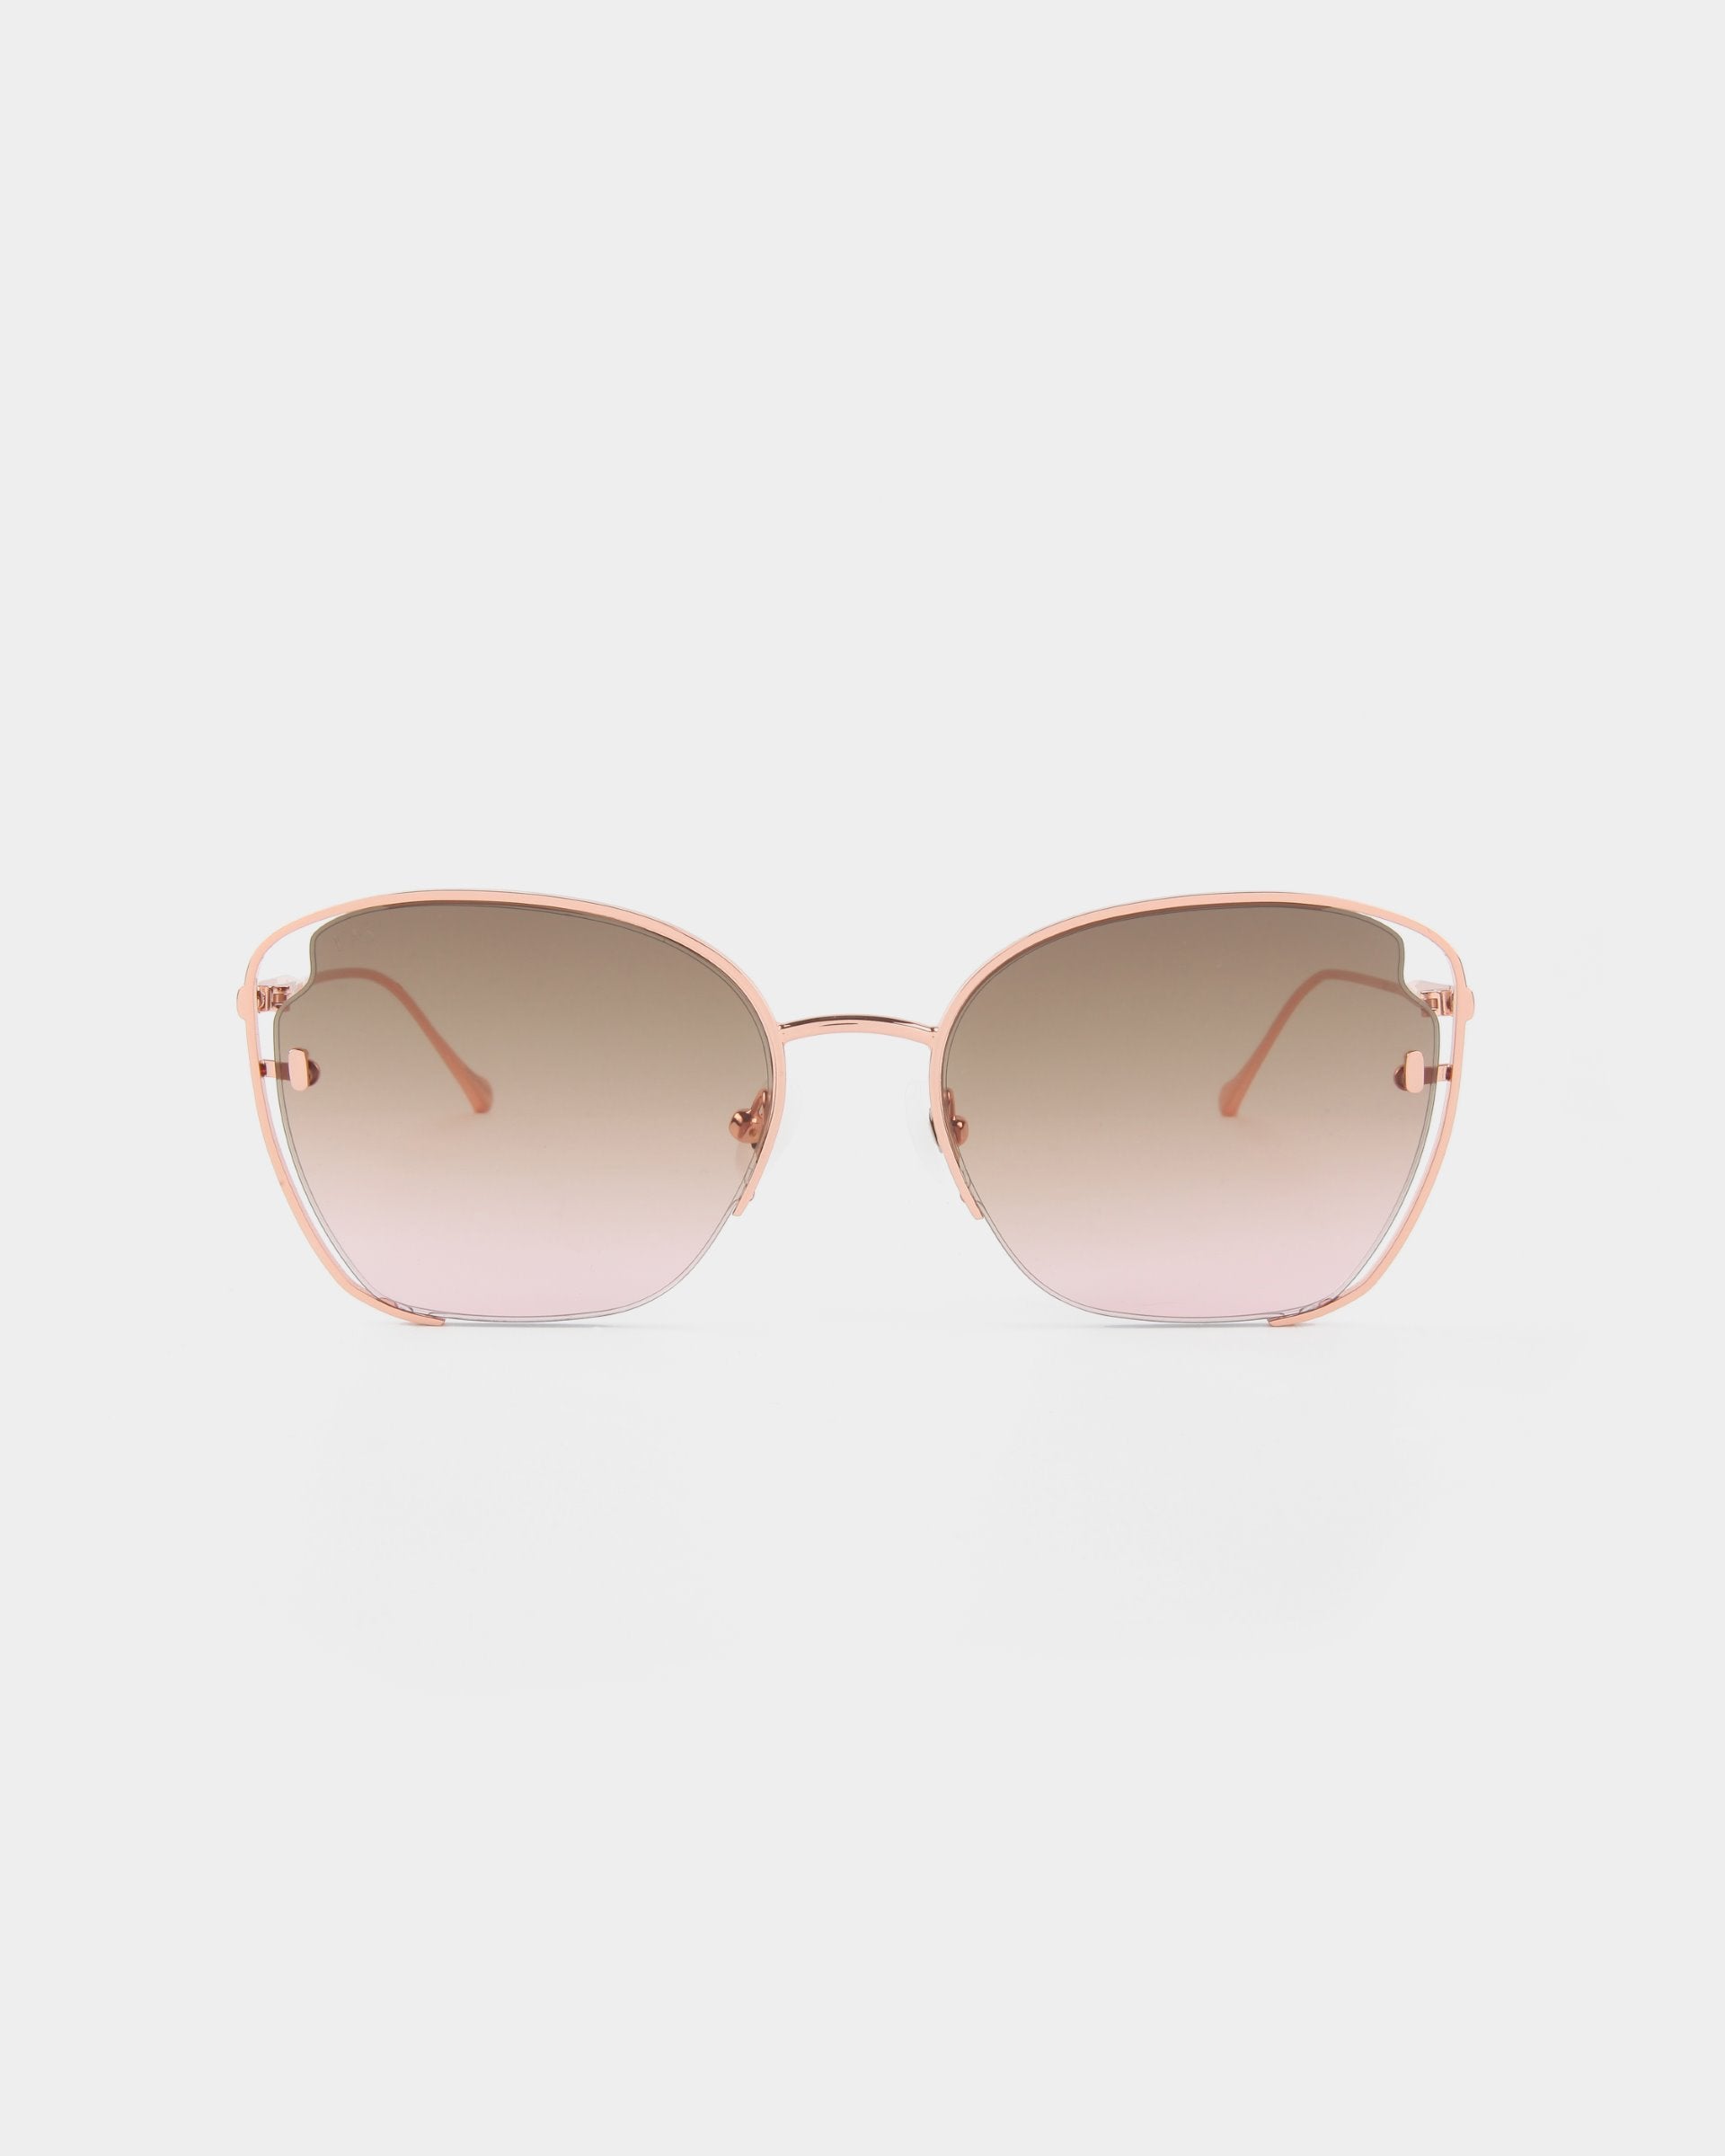 A pair of For Art's Sake® Eden sunglasses with a thin, 18-karat gold plated rose gold frame and gradient brown lenses, offering UVA & UVB protection, set against a white background.